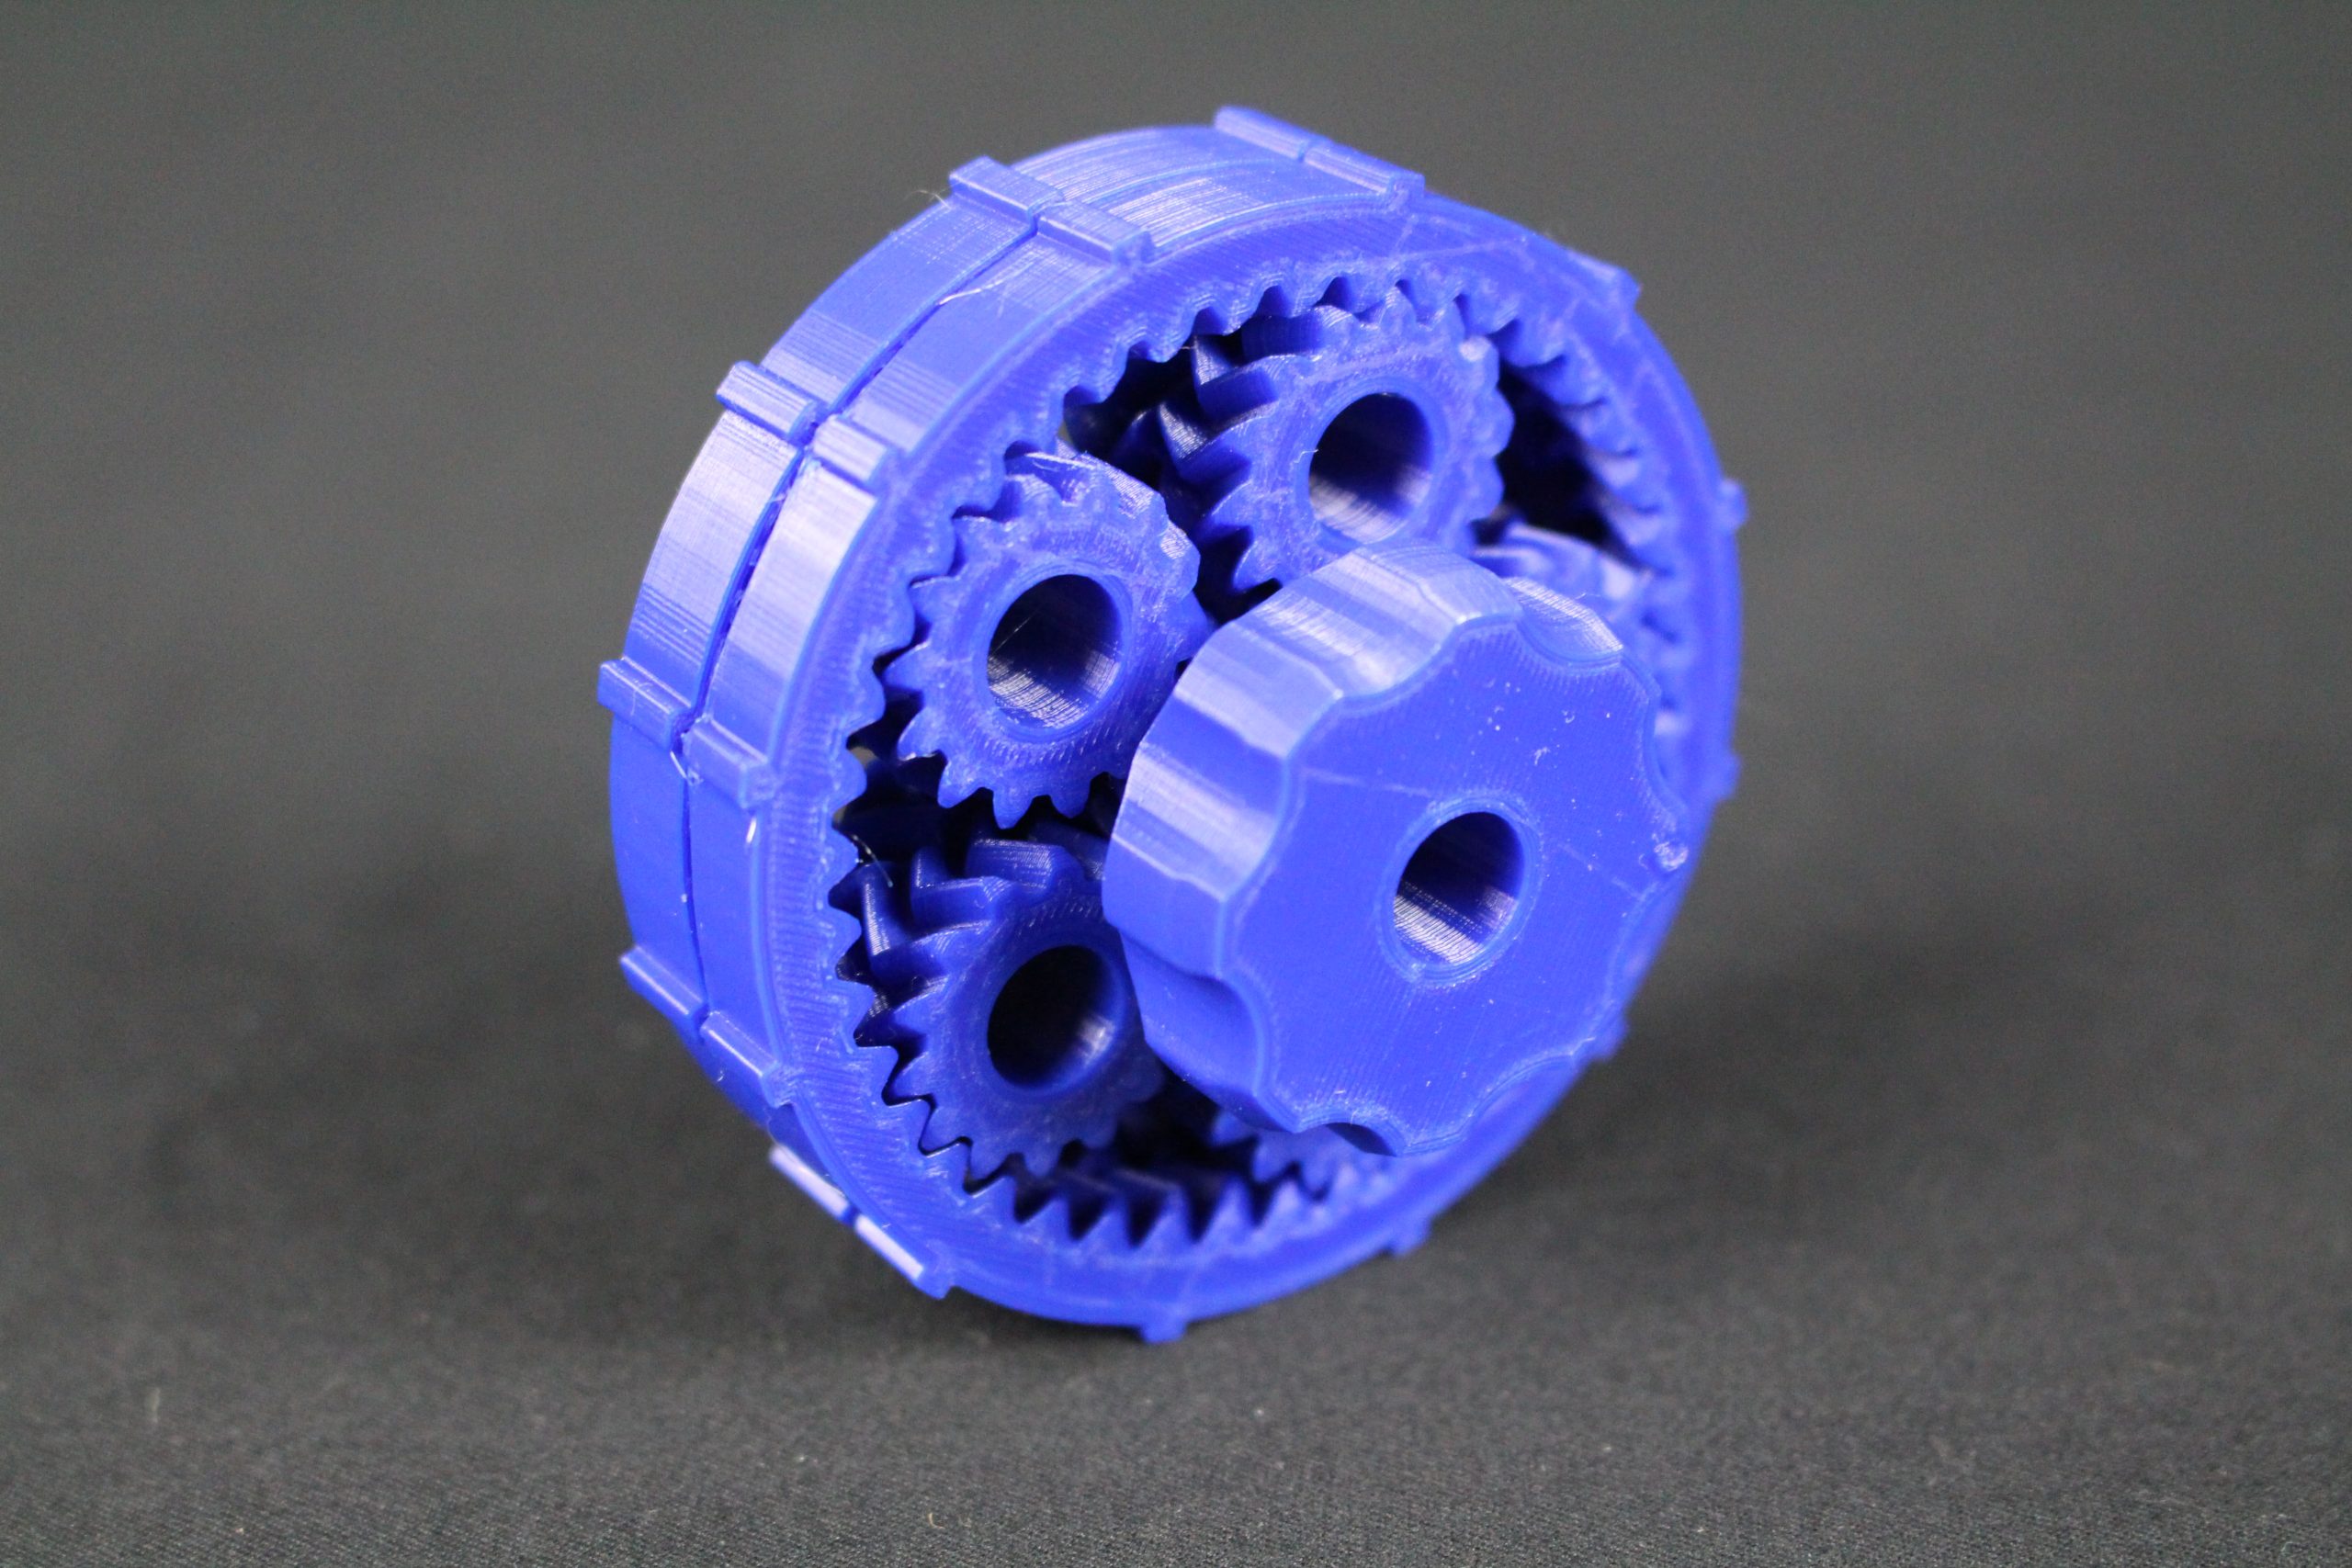 Mechanical assembly tests. Photos by 3D Printing Industry.